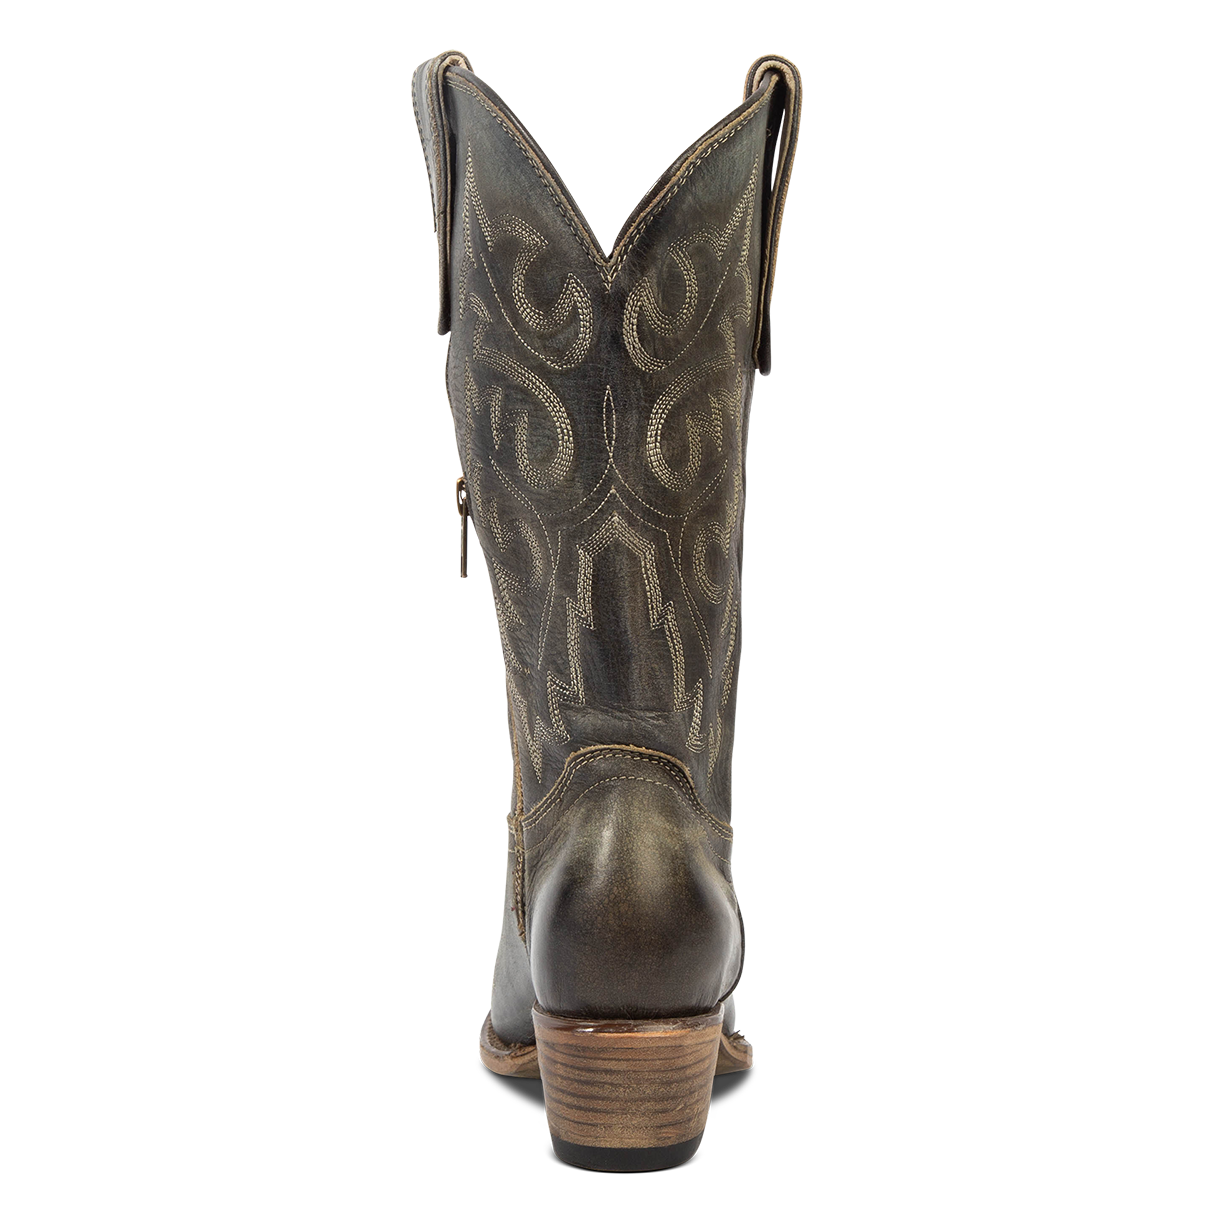 Back view showing intricate stitching and low heel on FREEBIRD women's Wilson olive leather western boot